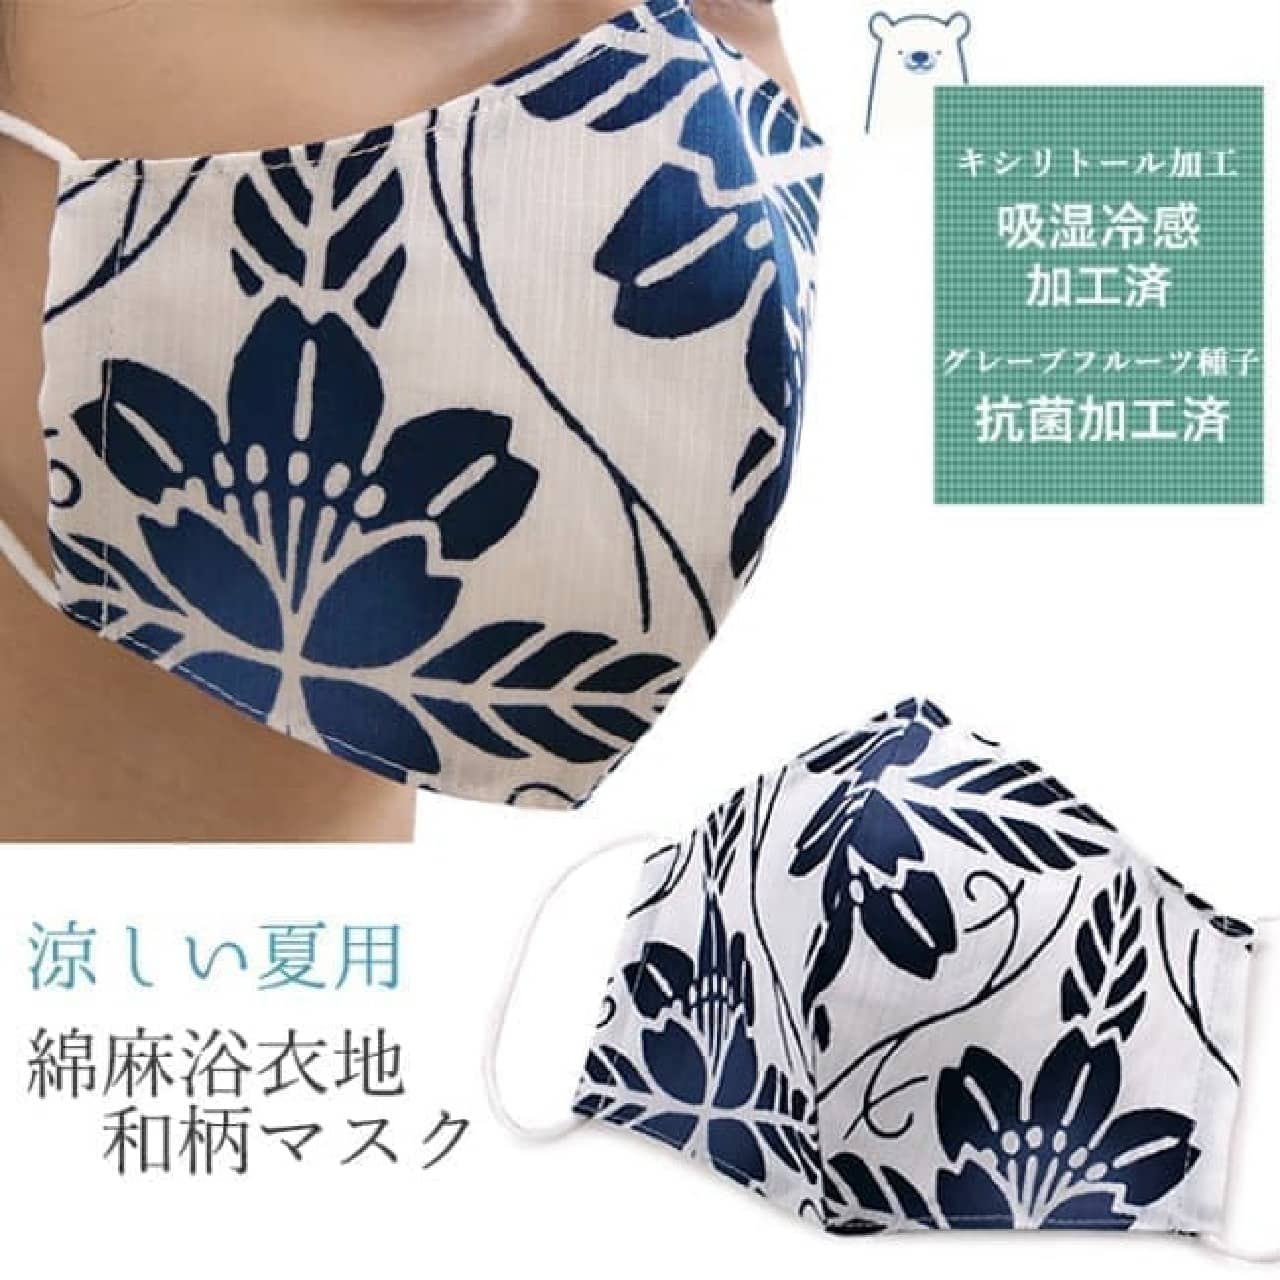 The dark blue cherry blossom pattern is cool! Japanese pattern mask using yukata fabric --Xylitol processing keeps your breathing cool